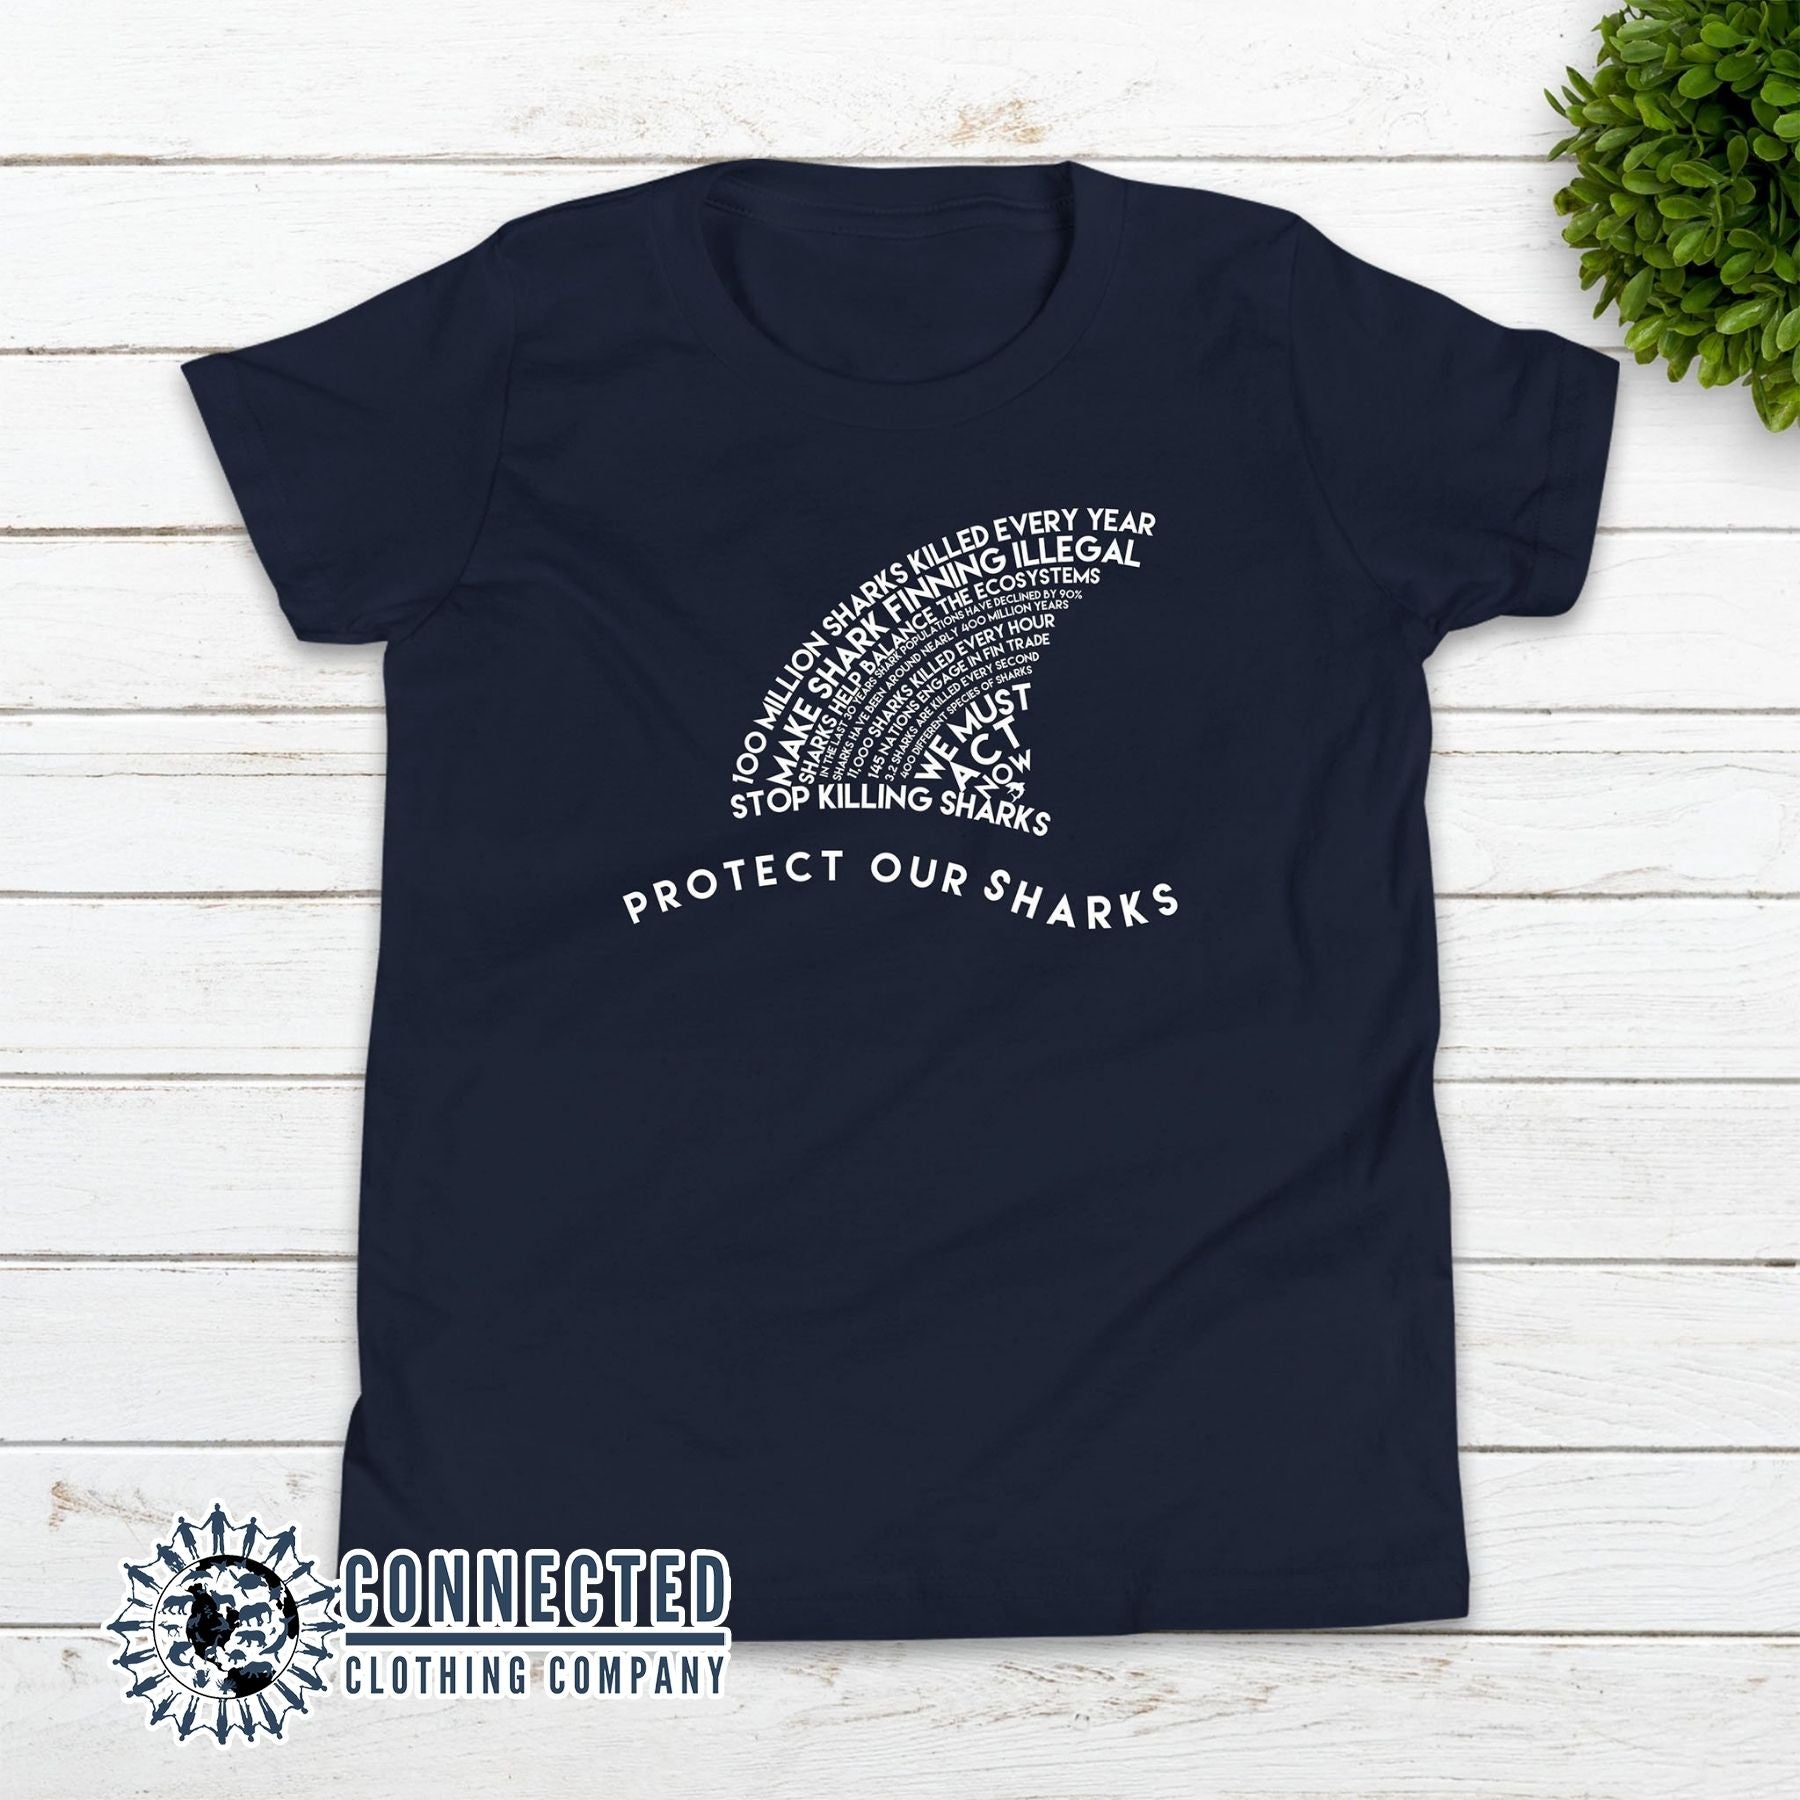 Navy Blue Protect Our Sharks Youth Short-Sleeve Tee - sweetsherriloudesigns - 10% of profits donated to Oceana shark conservation